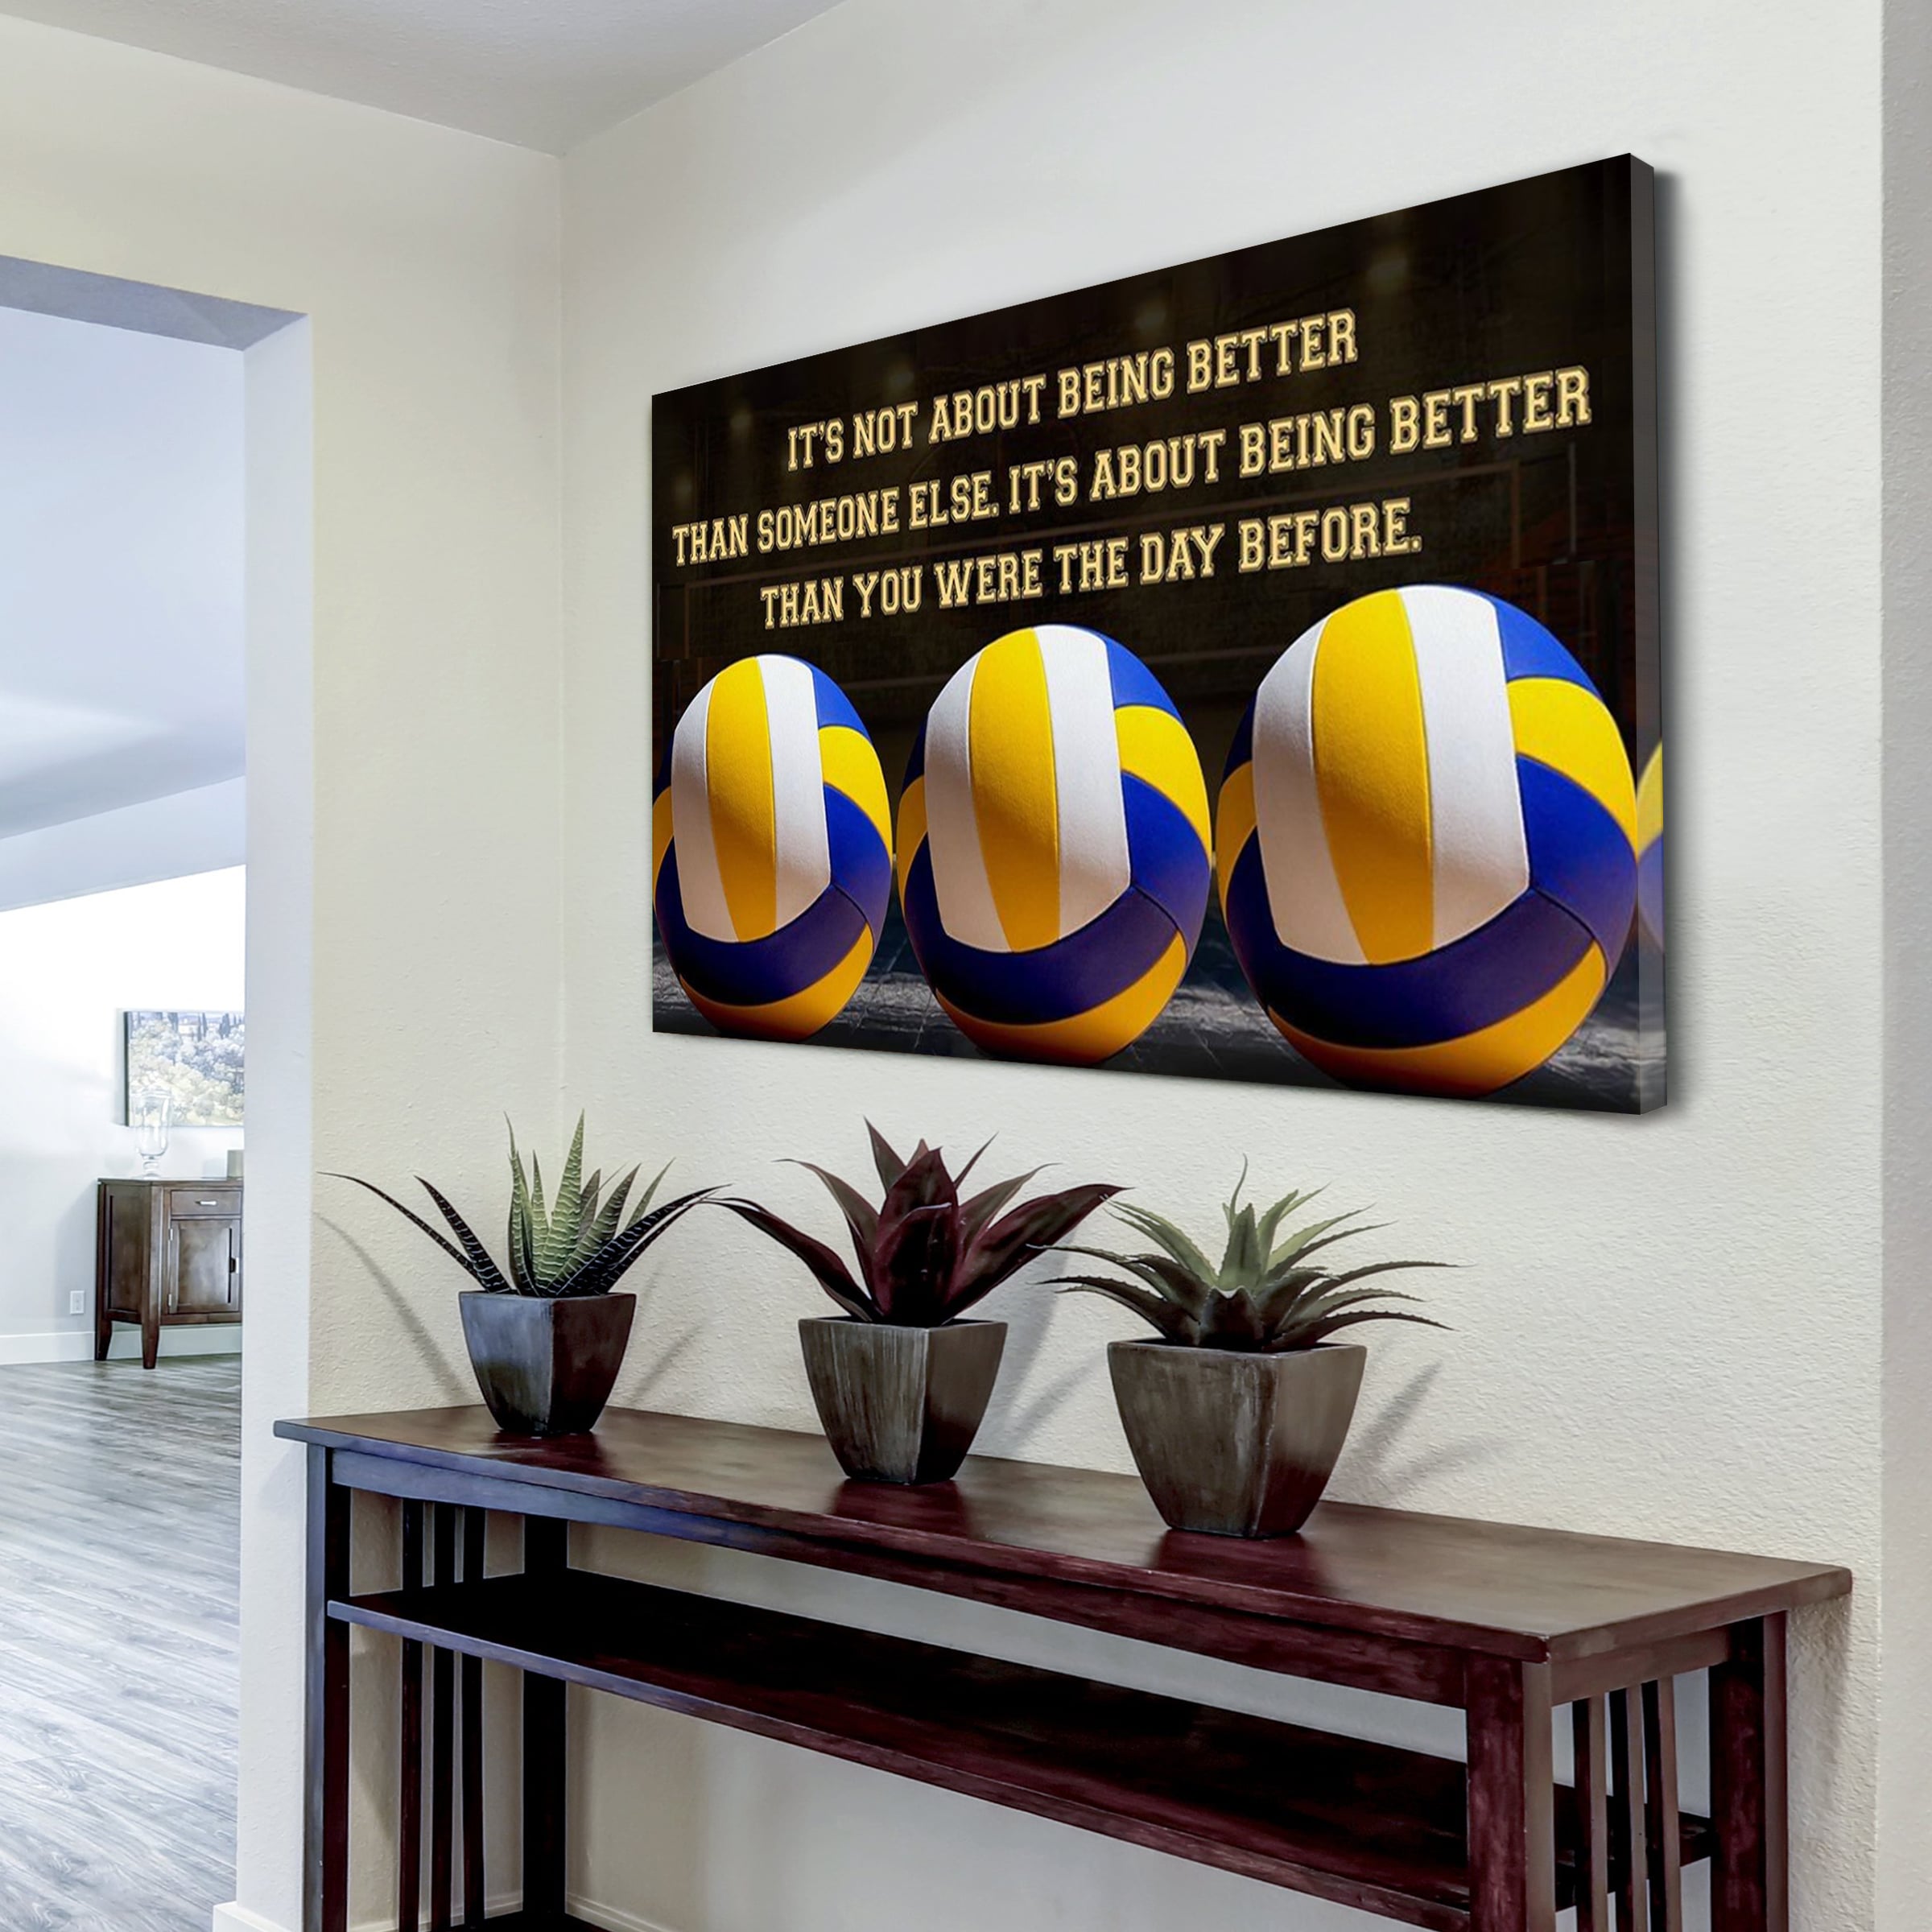 Volleyball customizable poster canvas - It is not about better than someone else, It is about being better than you were the day before